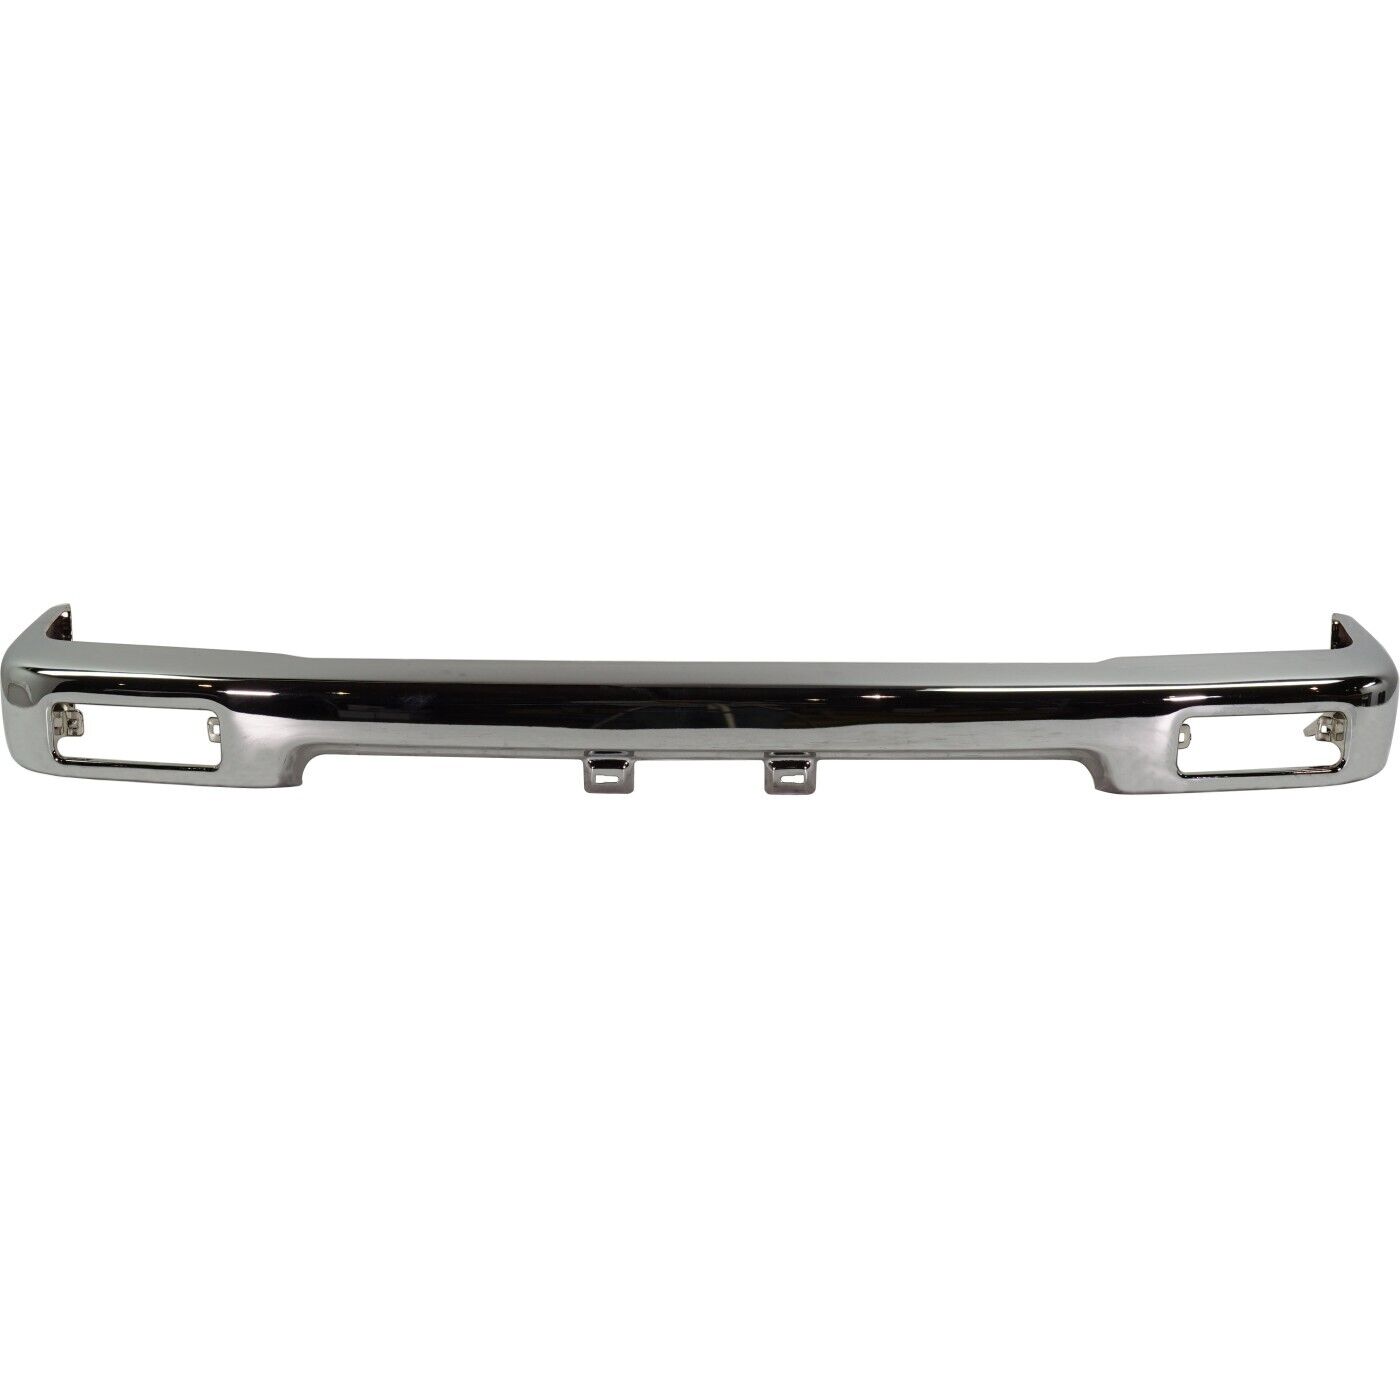 Front Bumper For 1989-1995 Toyota Pickup Chrome Steel 2WD